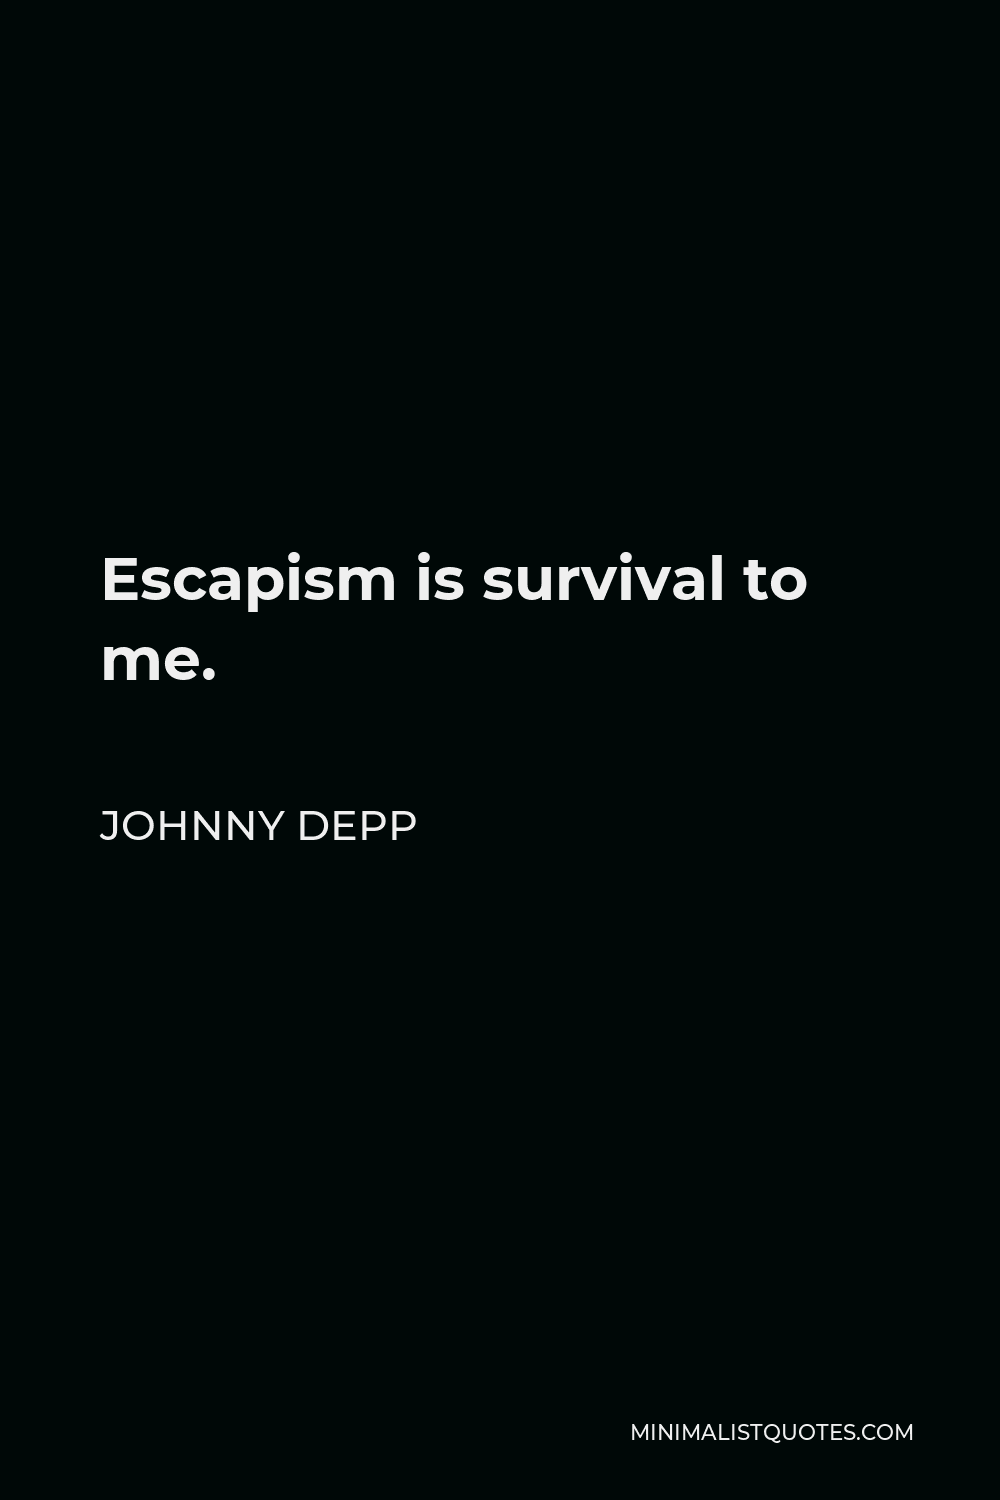 Johnny Depp Quote - Escapism is survival to me.